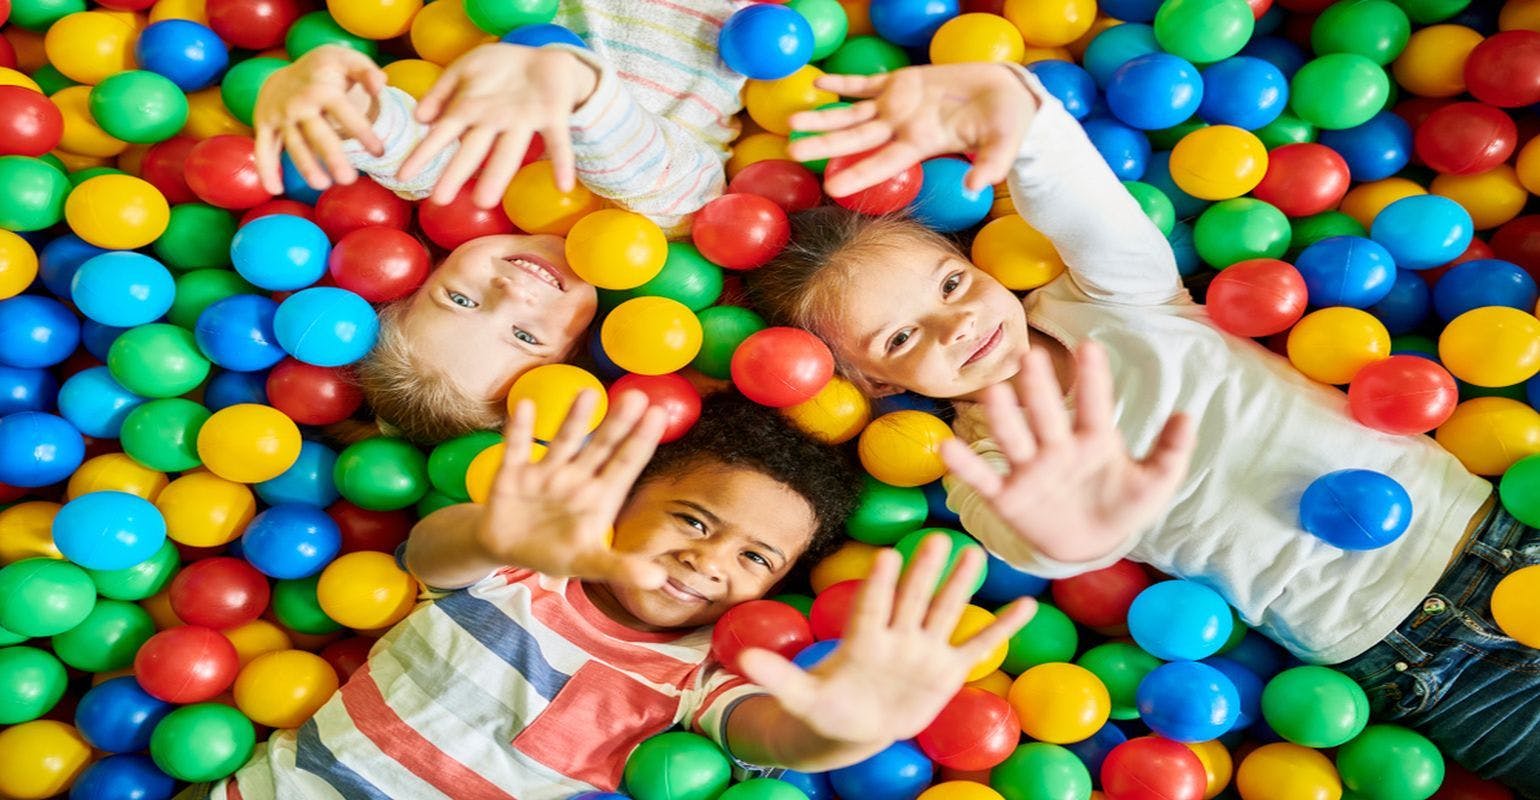 Examining Ball Pits as a Playground for Pathogenic Organisms